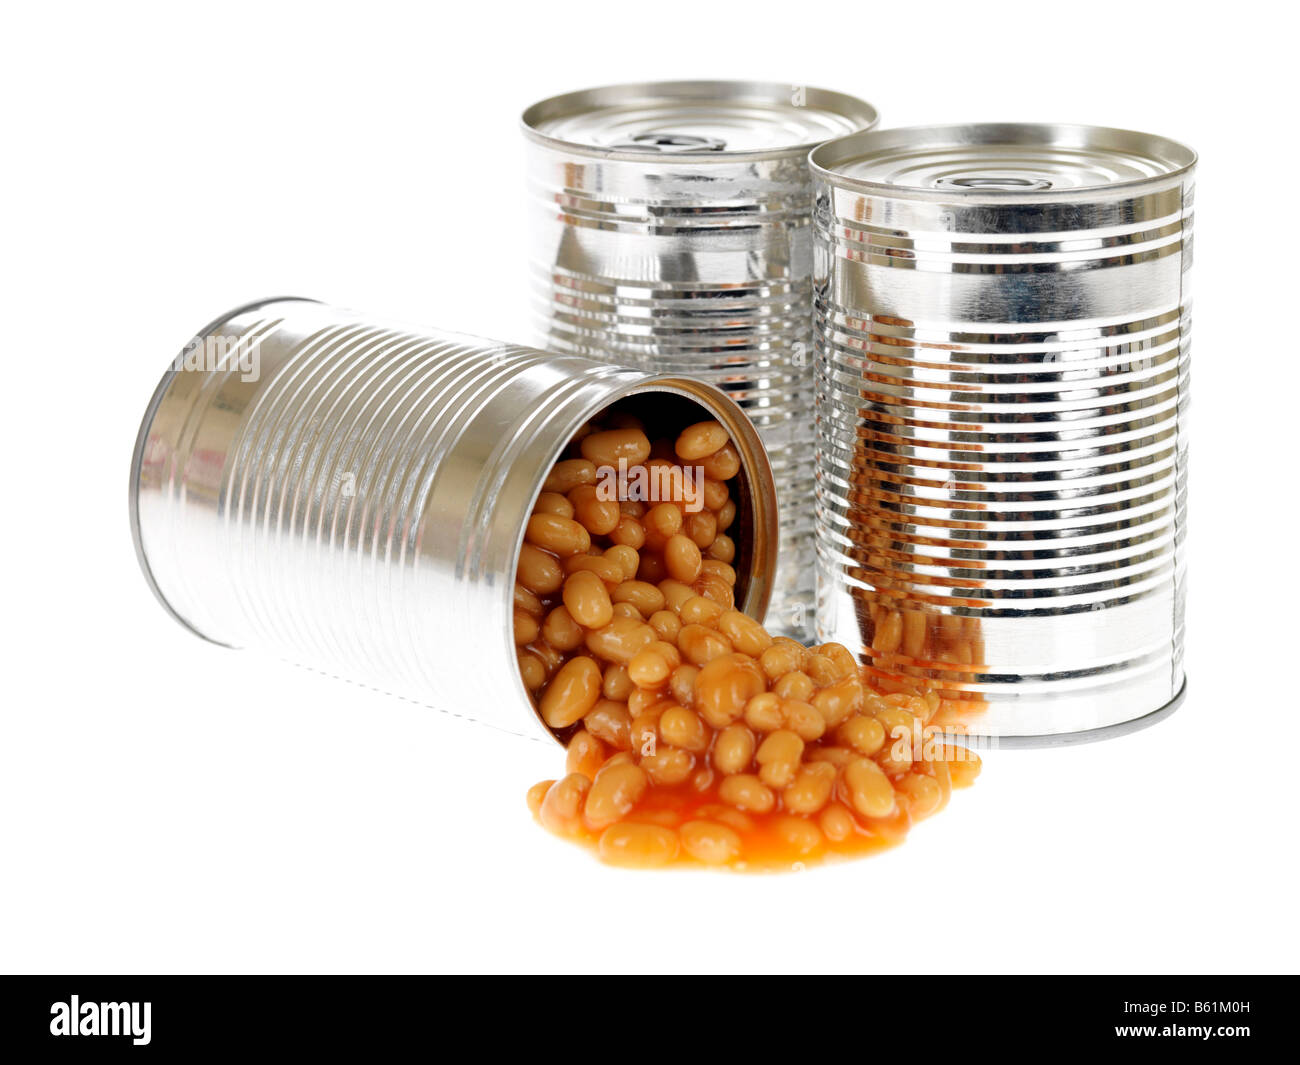 Бин тин. A tin of Beans. A tin of Tomatoes. Baked Beans tin.